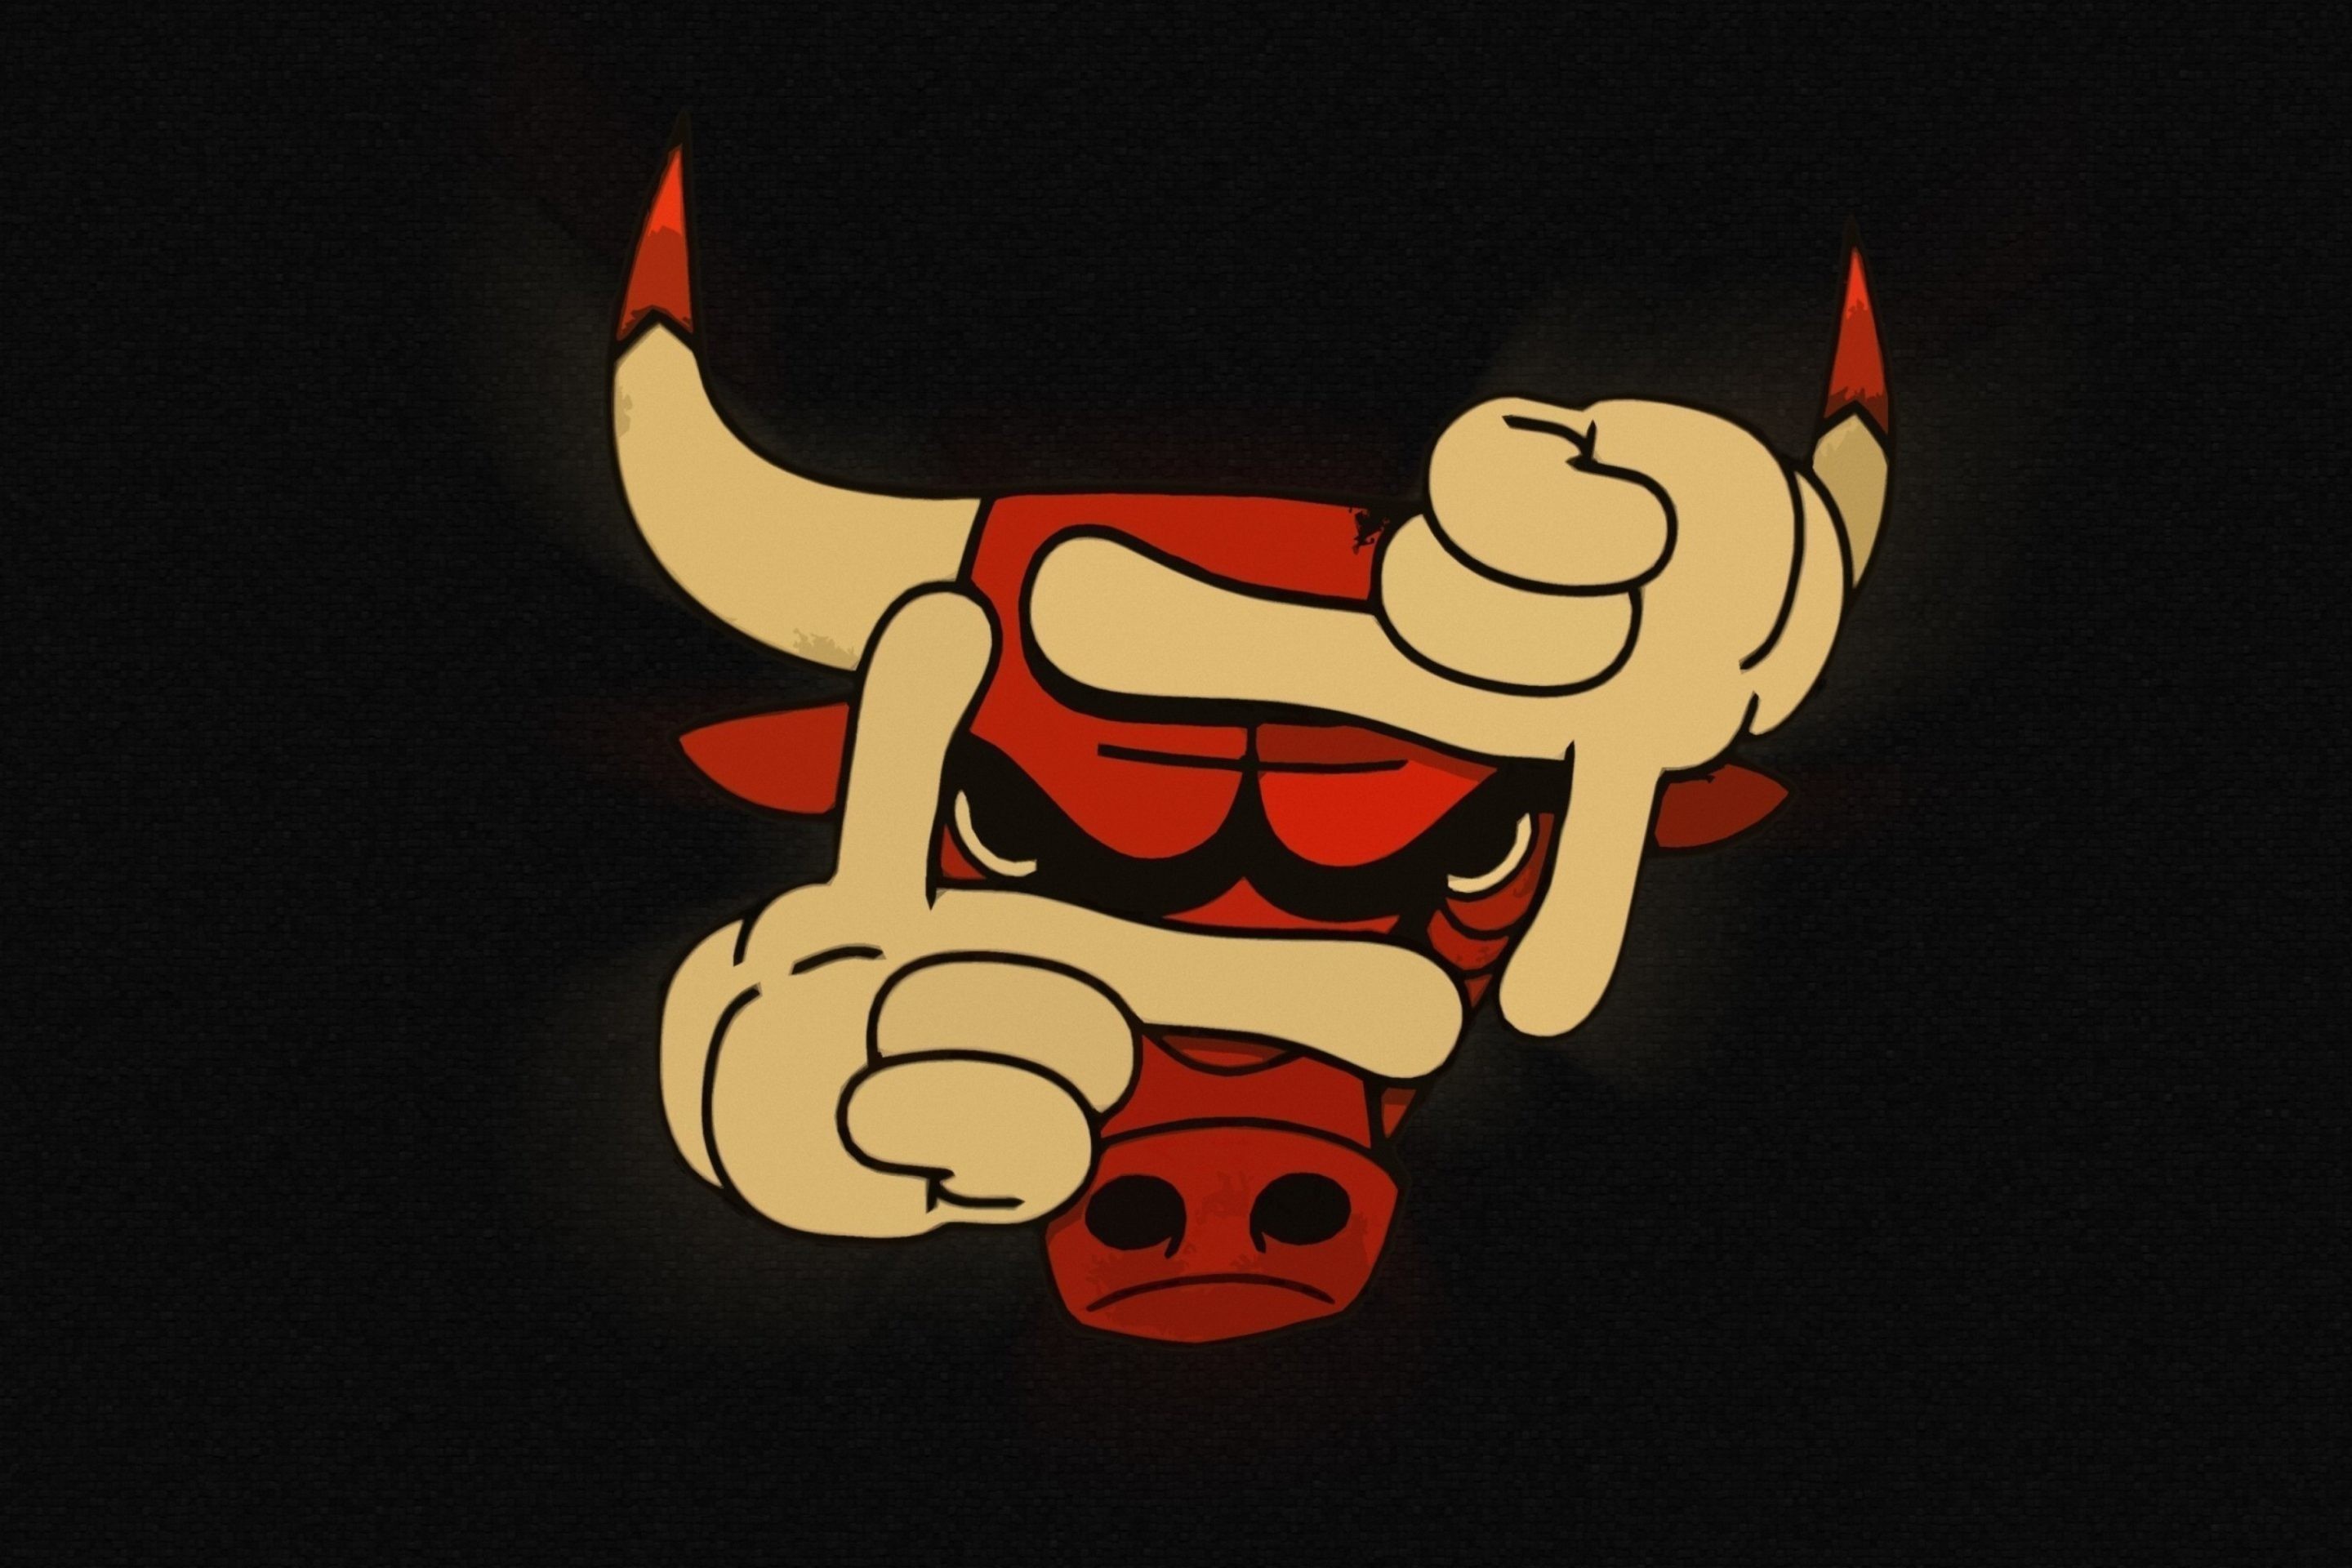 Chicago Bulls HD Wallpapers (74+ images)